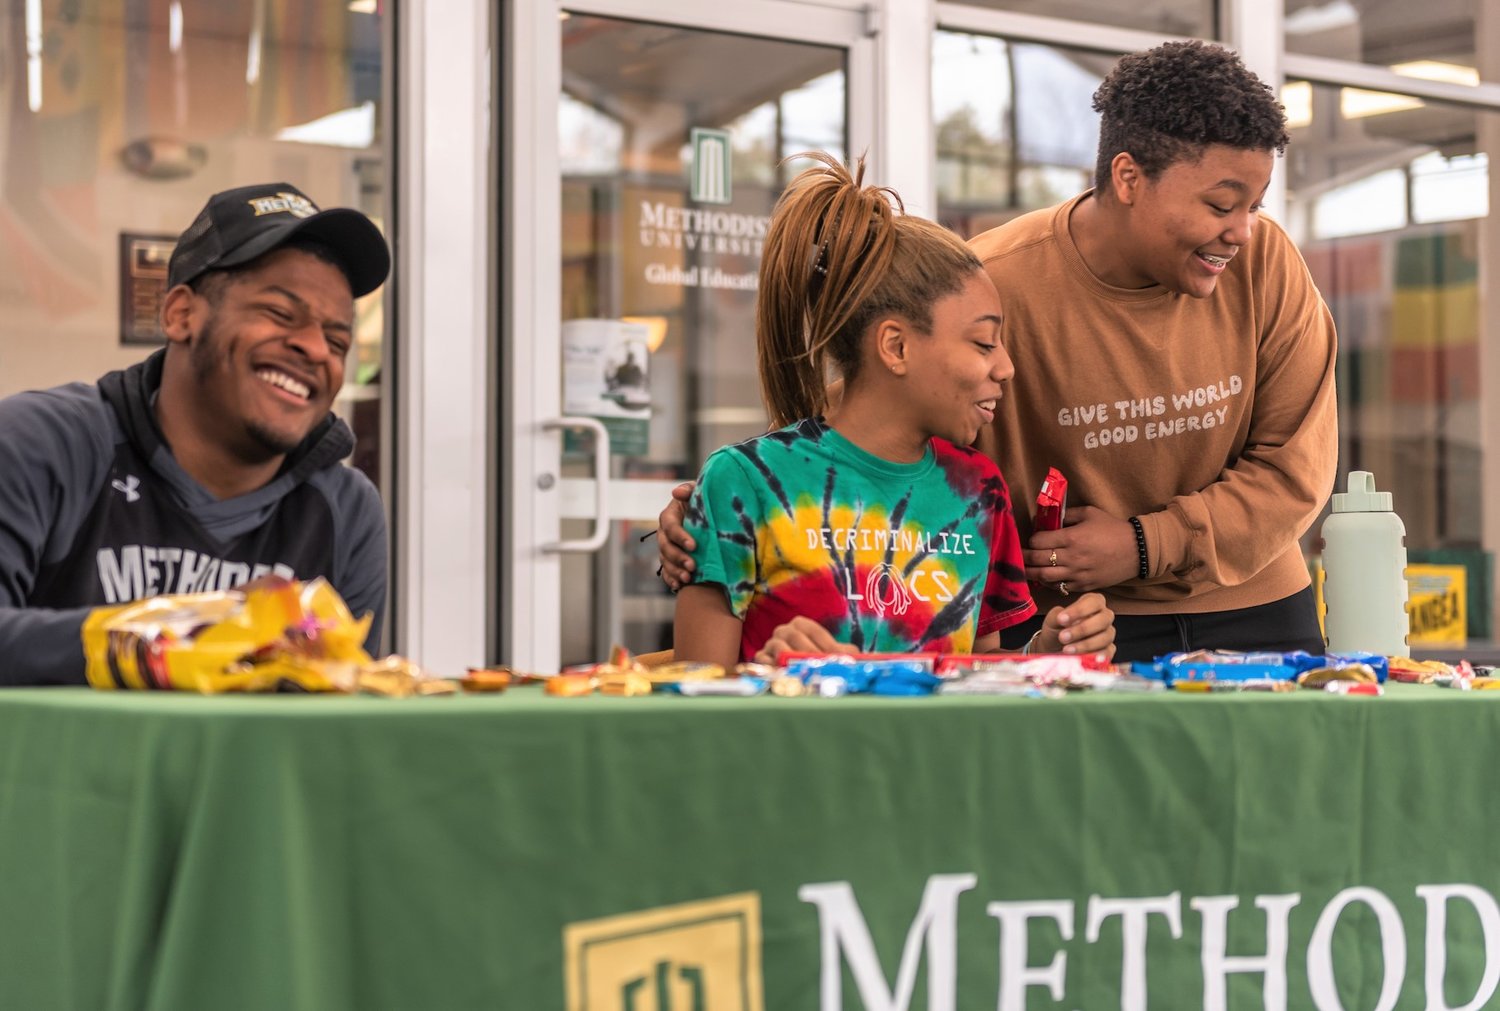 Students hand out giveaways and information at the Black Student Union signup table during Methodist University's celebration of Black History Month.